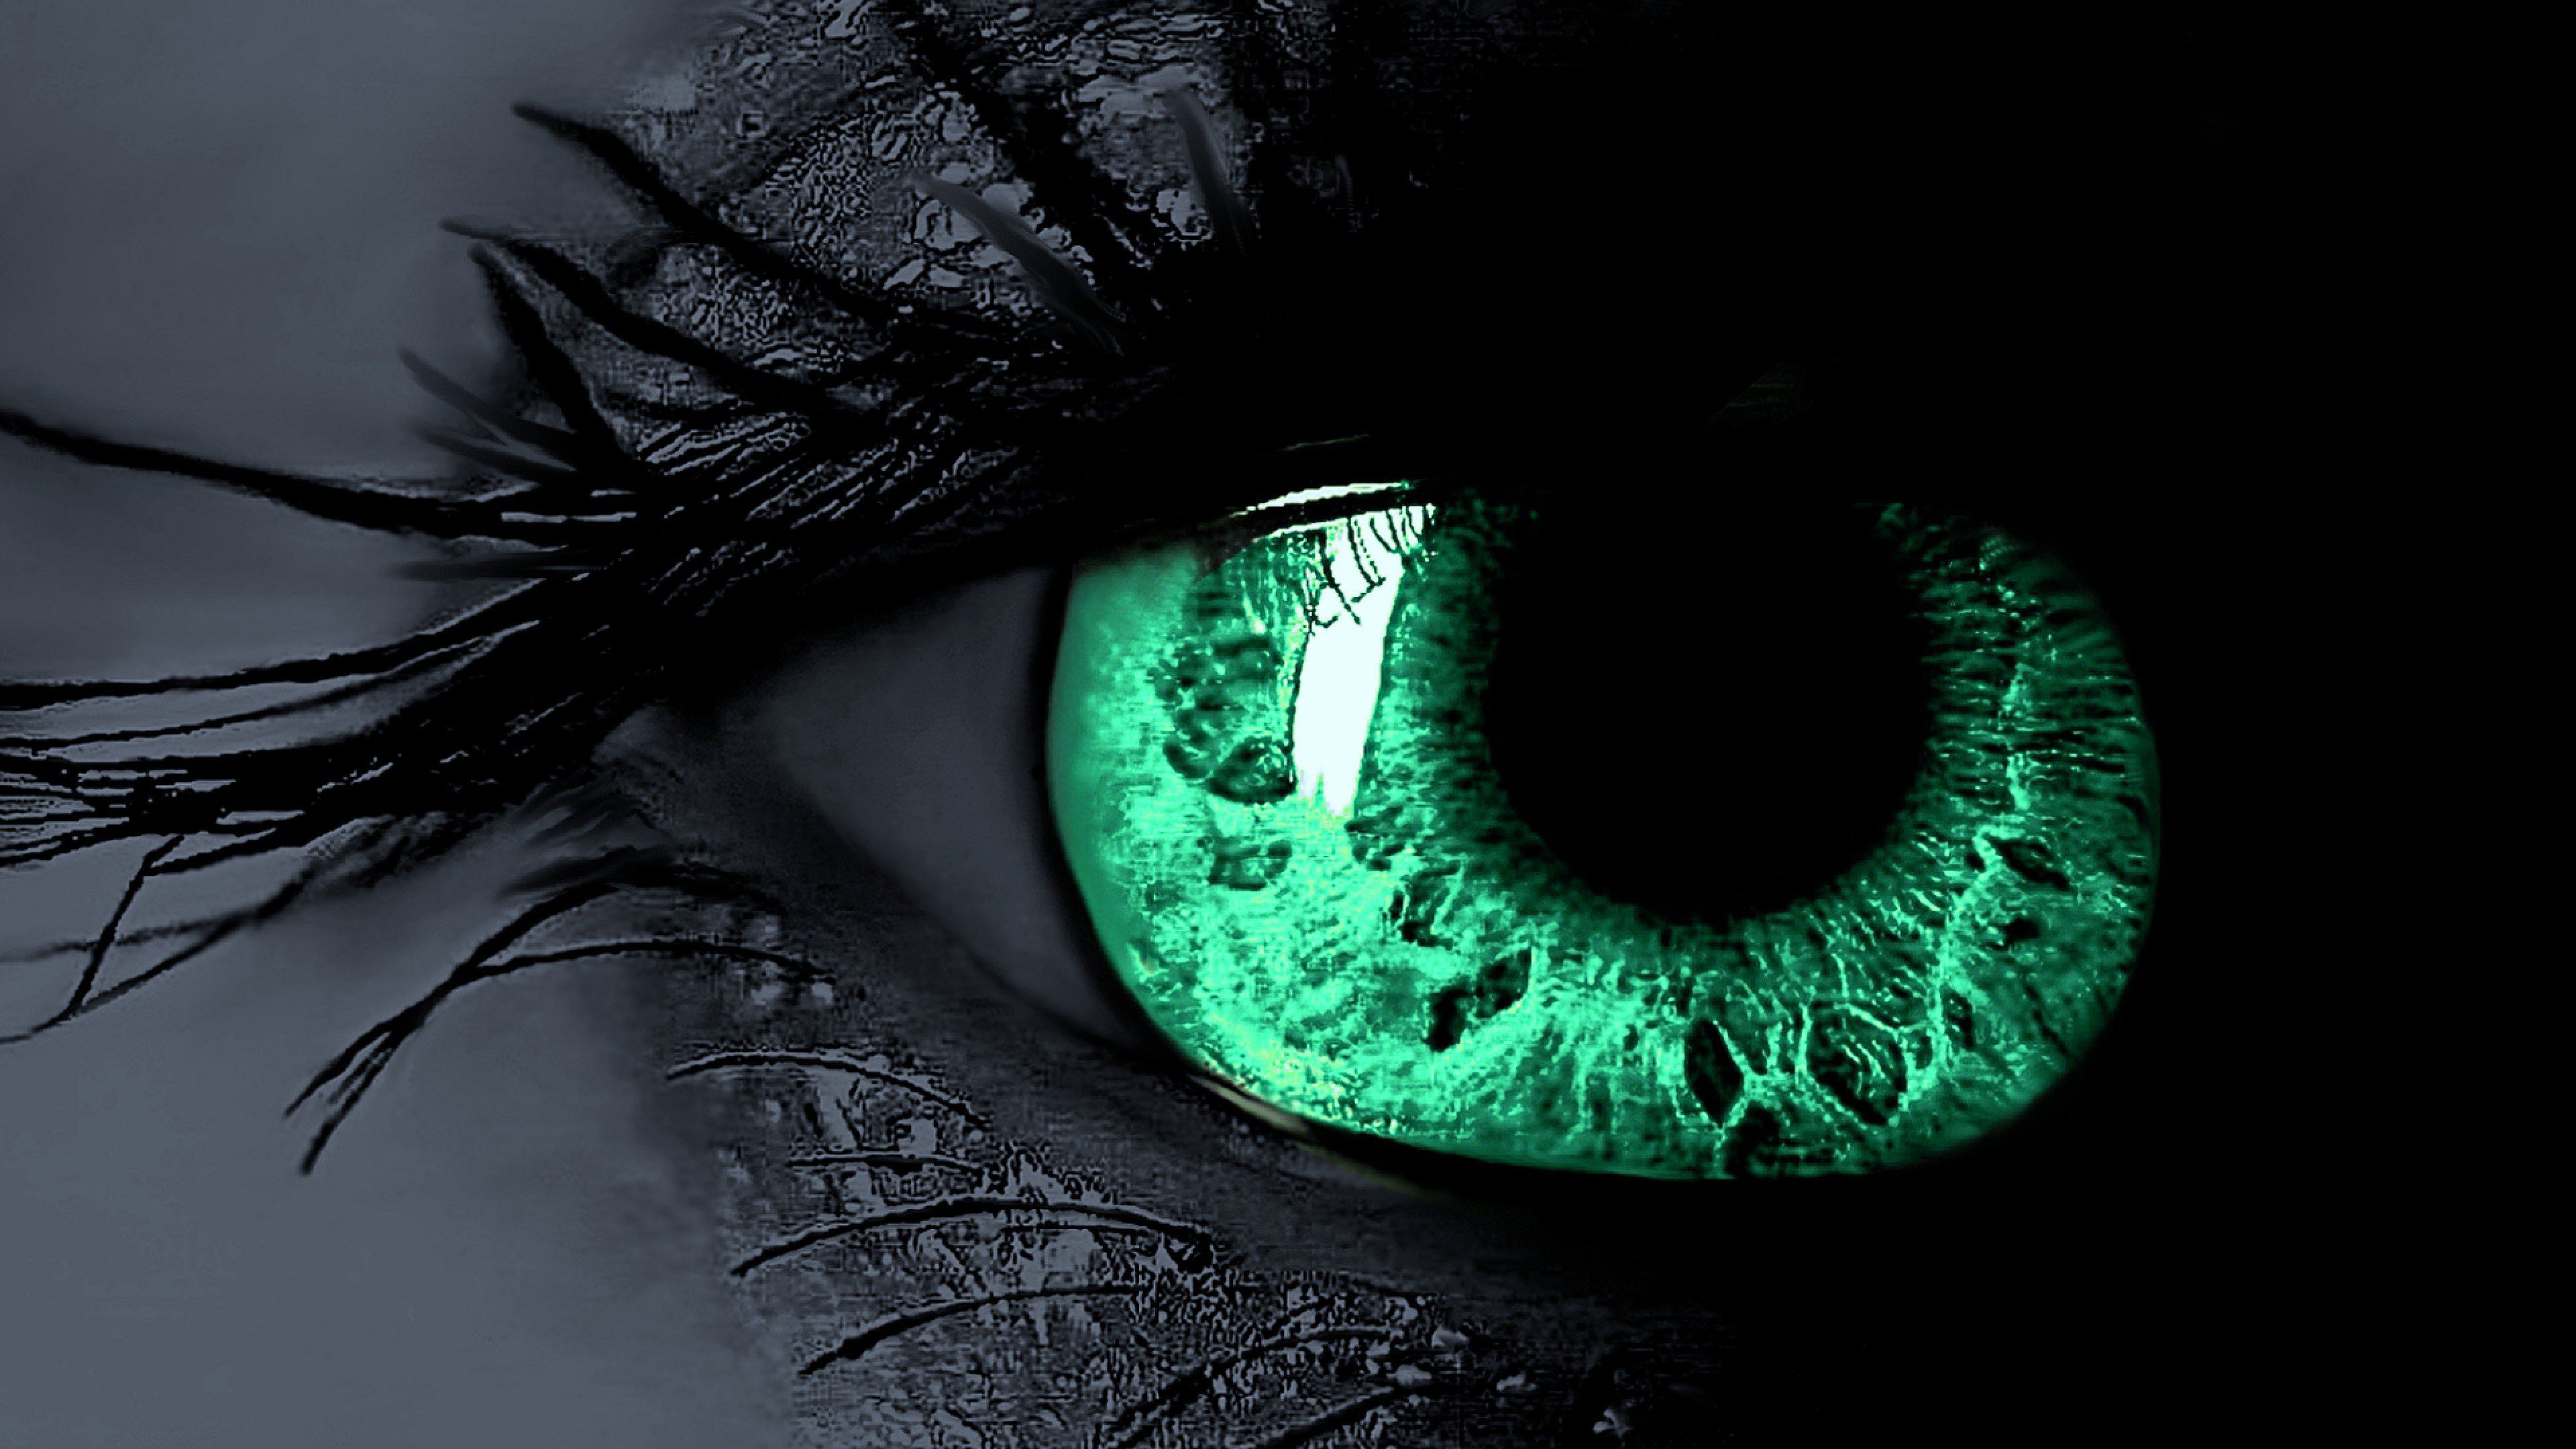 Eyes 4K wallpaper for your desktop or mobile screen free and easy to download